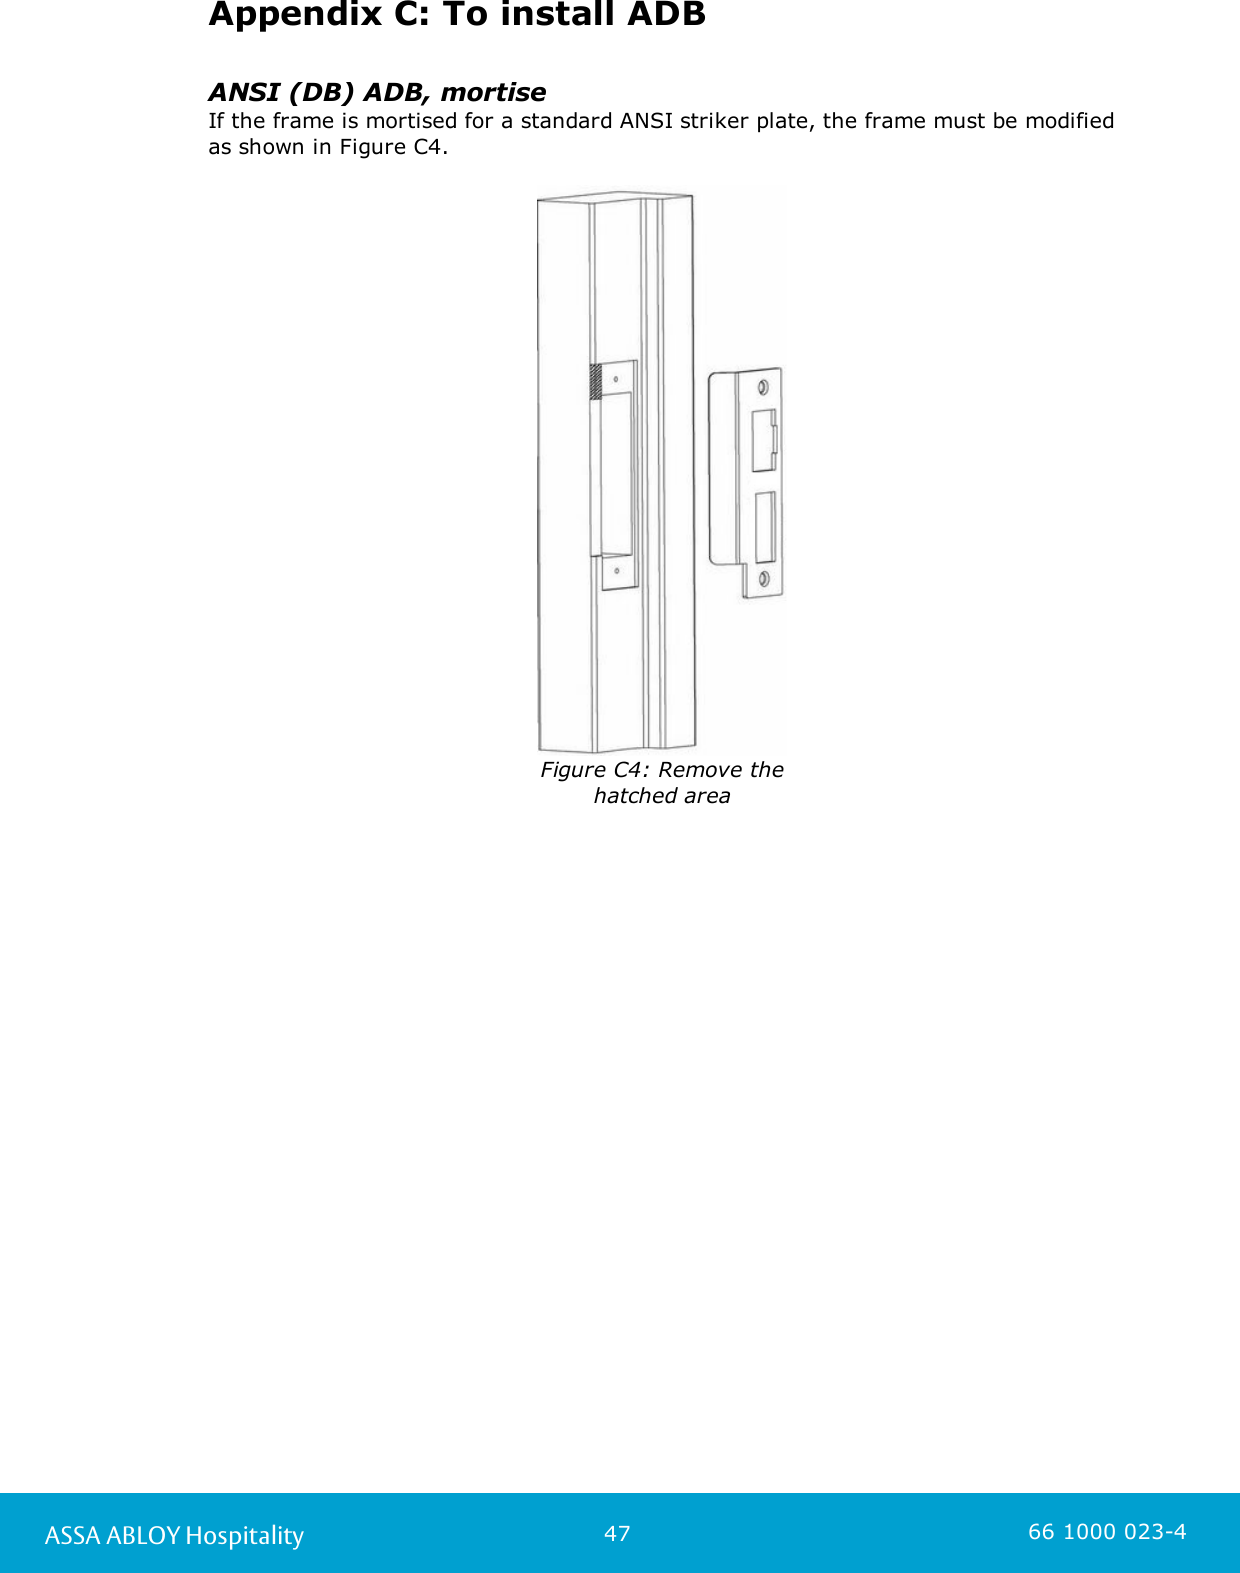 47ASSA ABLOY Hospitality 66 1000 023-4Appendix C: To install ADBANSI (DB) ADB, mortiseIf the frame is mortised for a standard ANSI striker plate, the frame must be modifiedas shown in Figure C4.Figure C4: Remove thehatched area